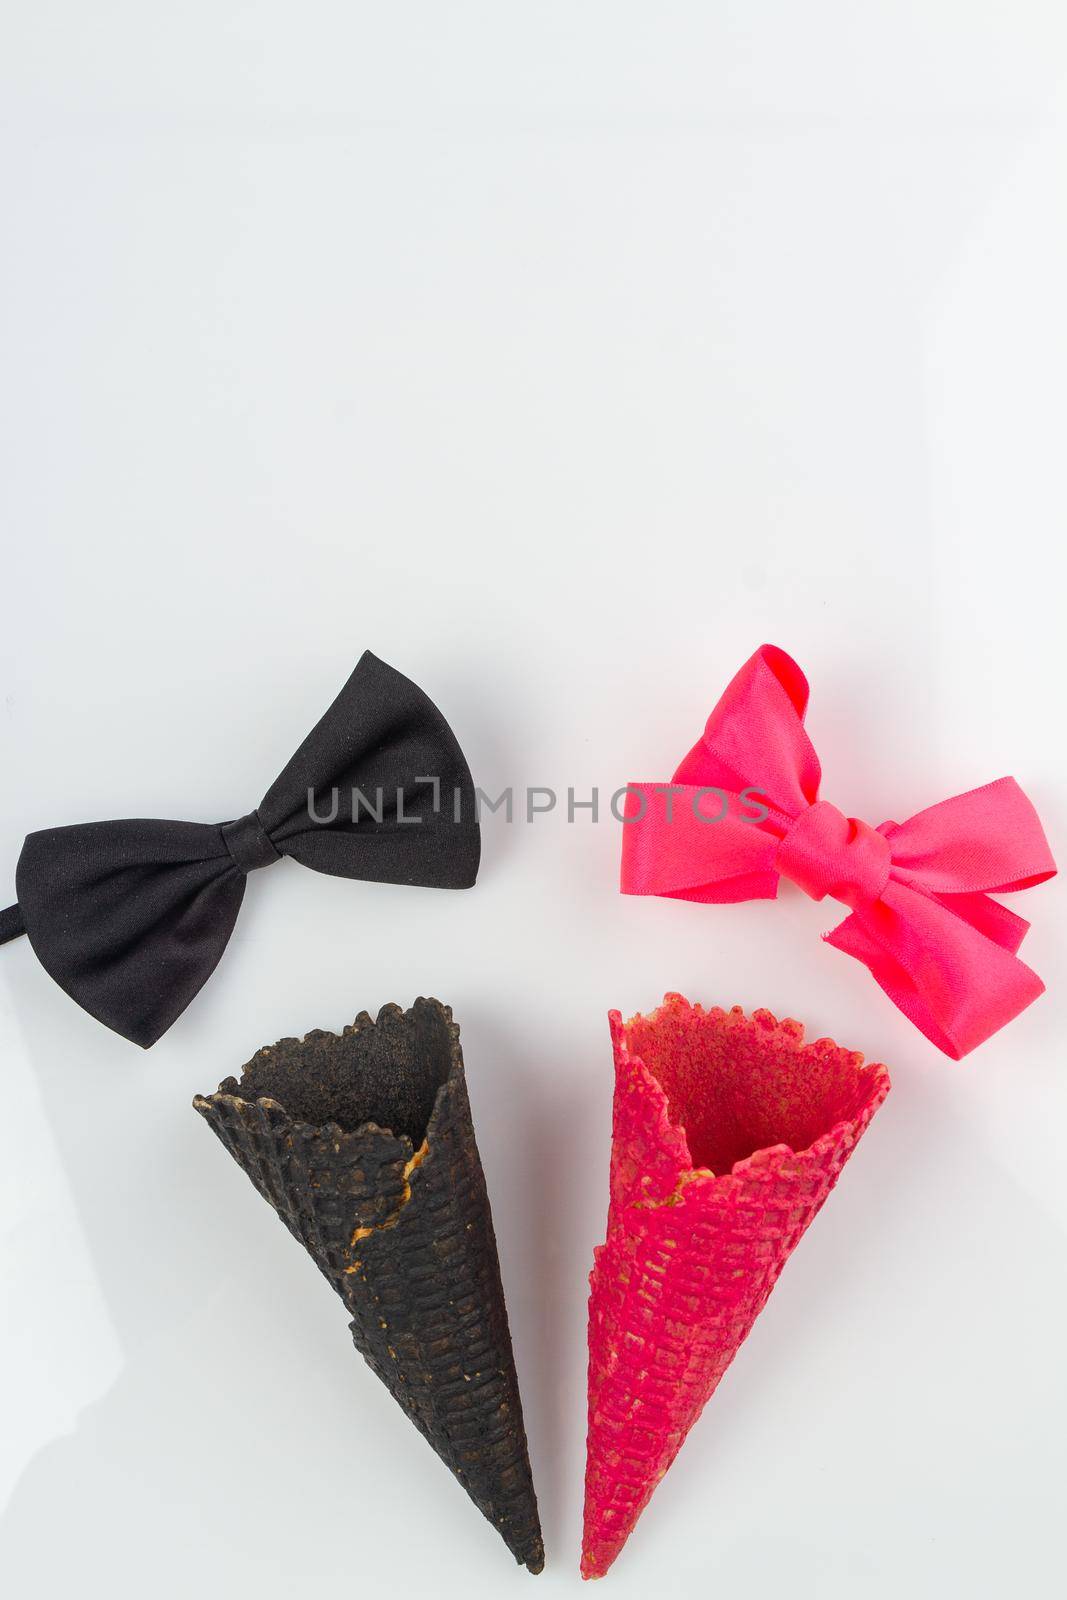 Black and pink waffle cones with bow ties. Mens and womens concept. Vertical shot white background.